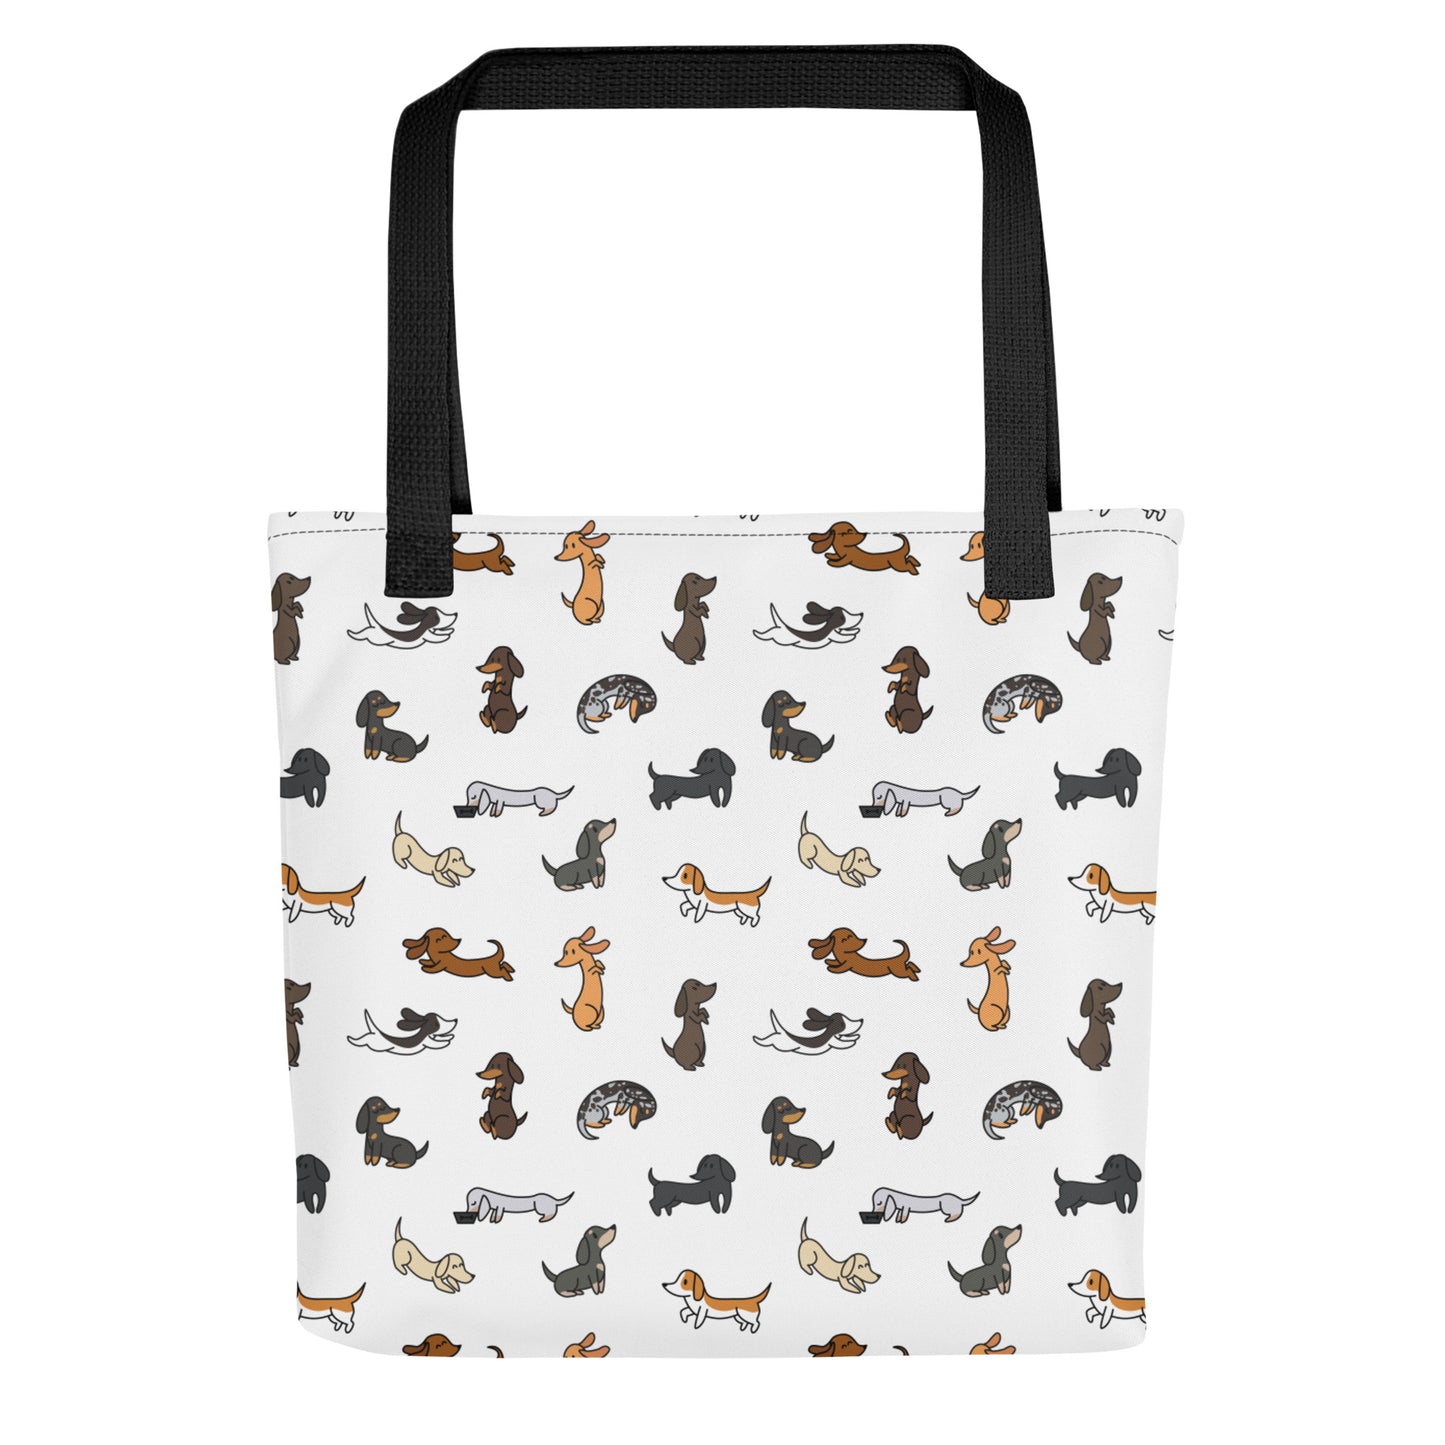 Cute Dachshunds Patterned Tote Bag